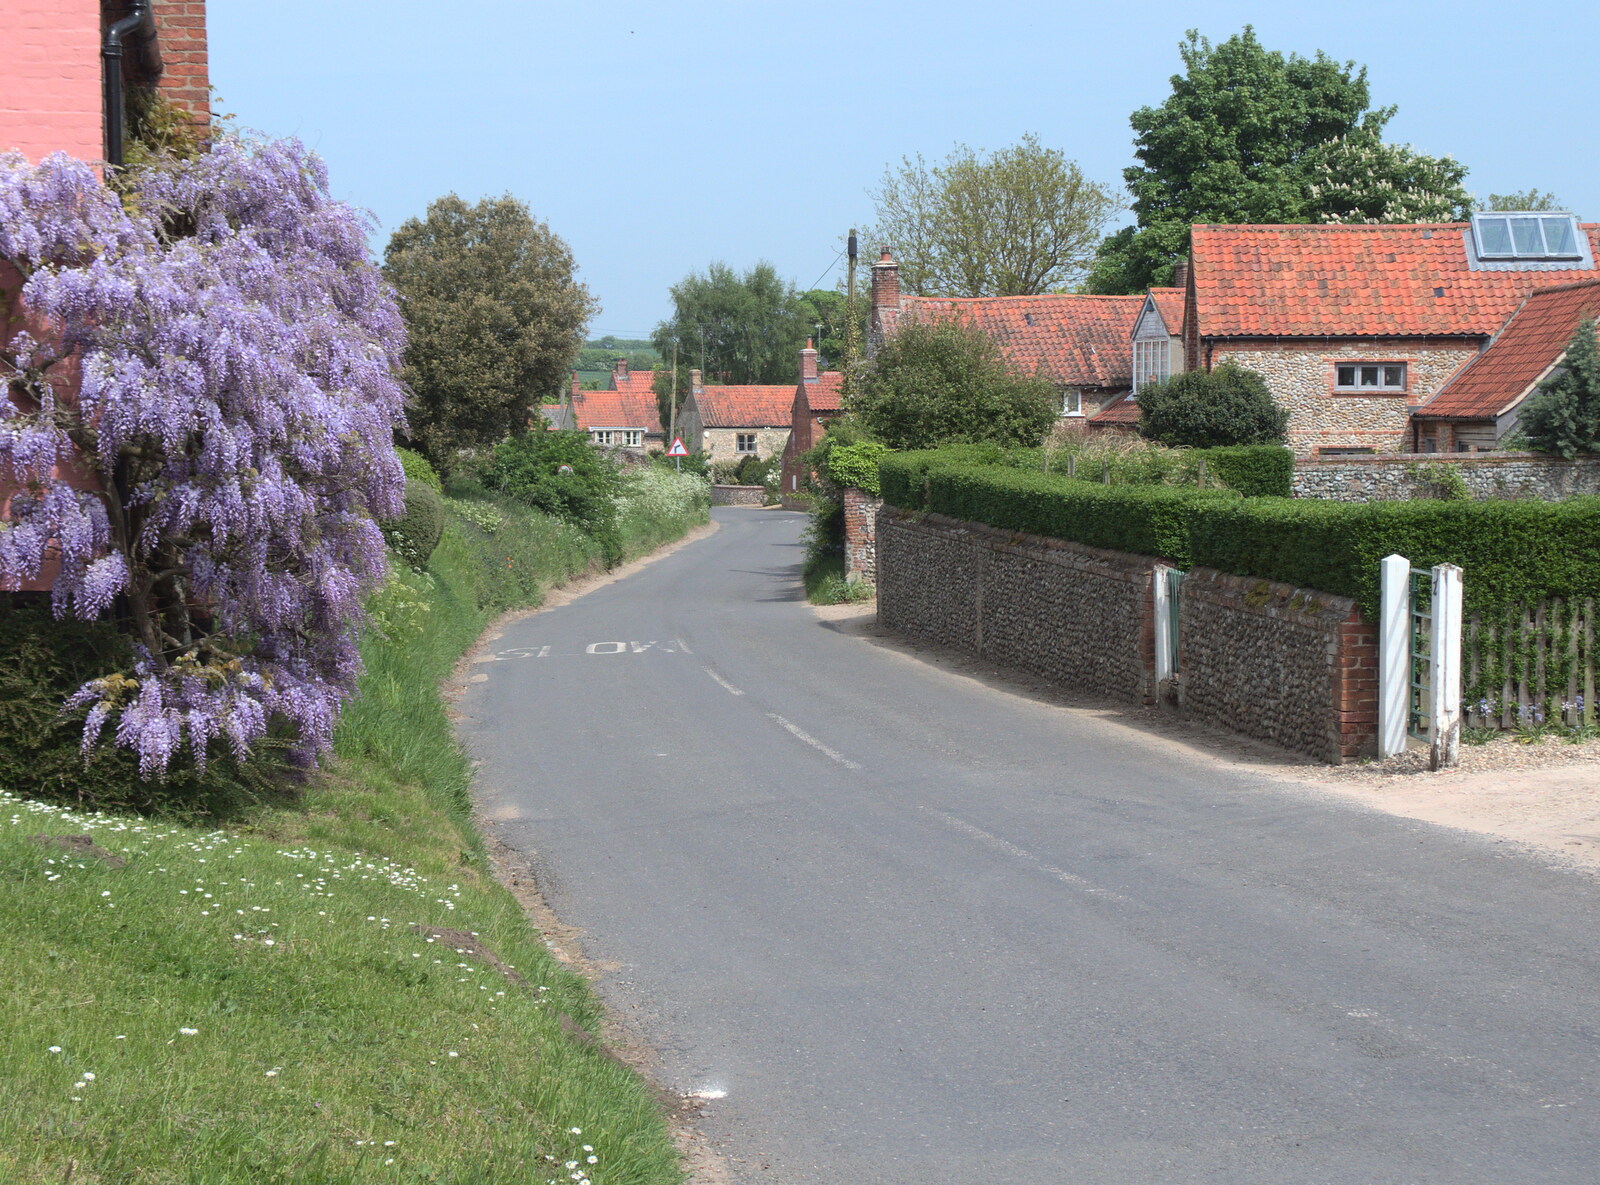 Nice wisteria on the lane to Blakeney from The BSCC Weekend Away, Holt, Norfolk - 12th May 2018